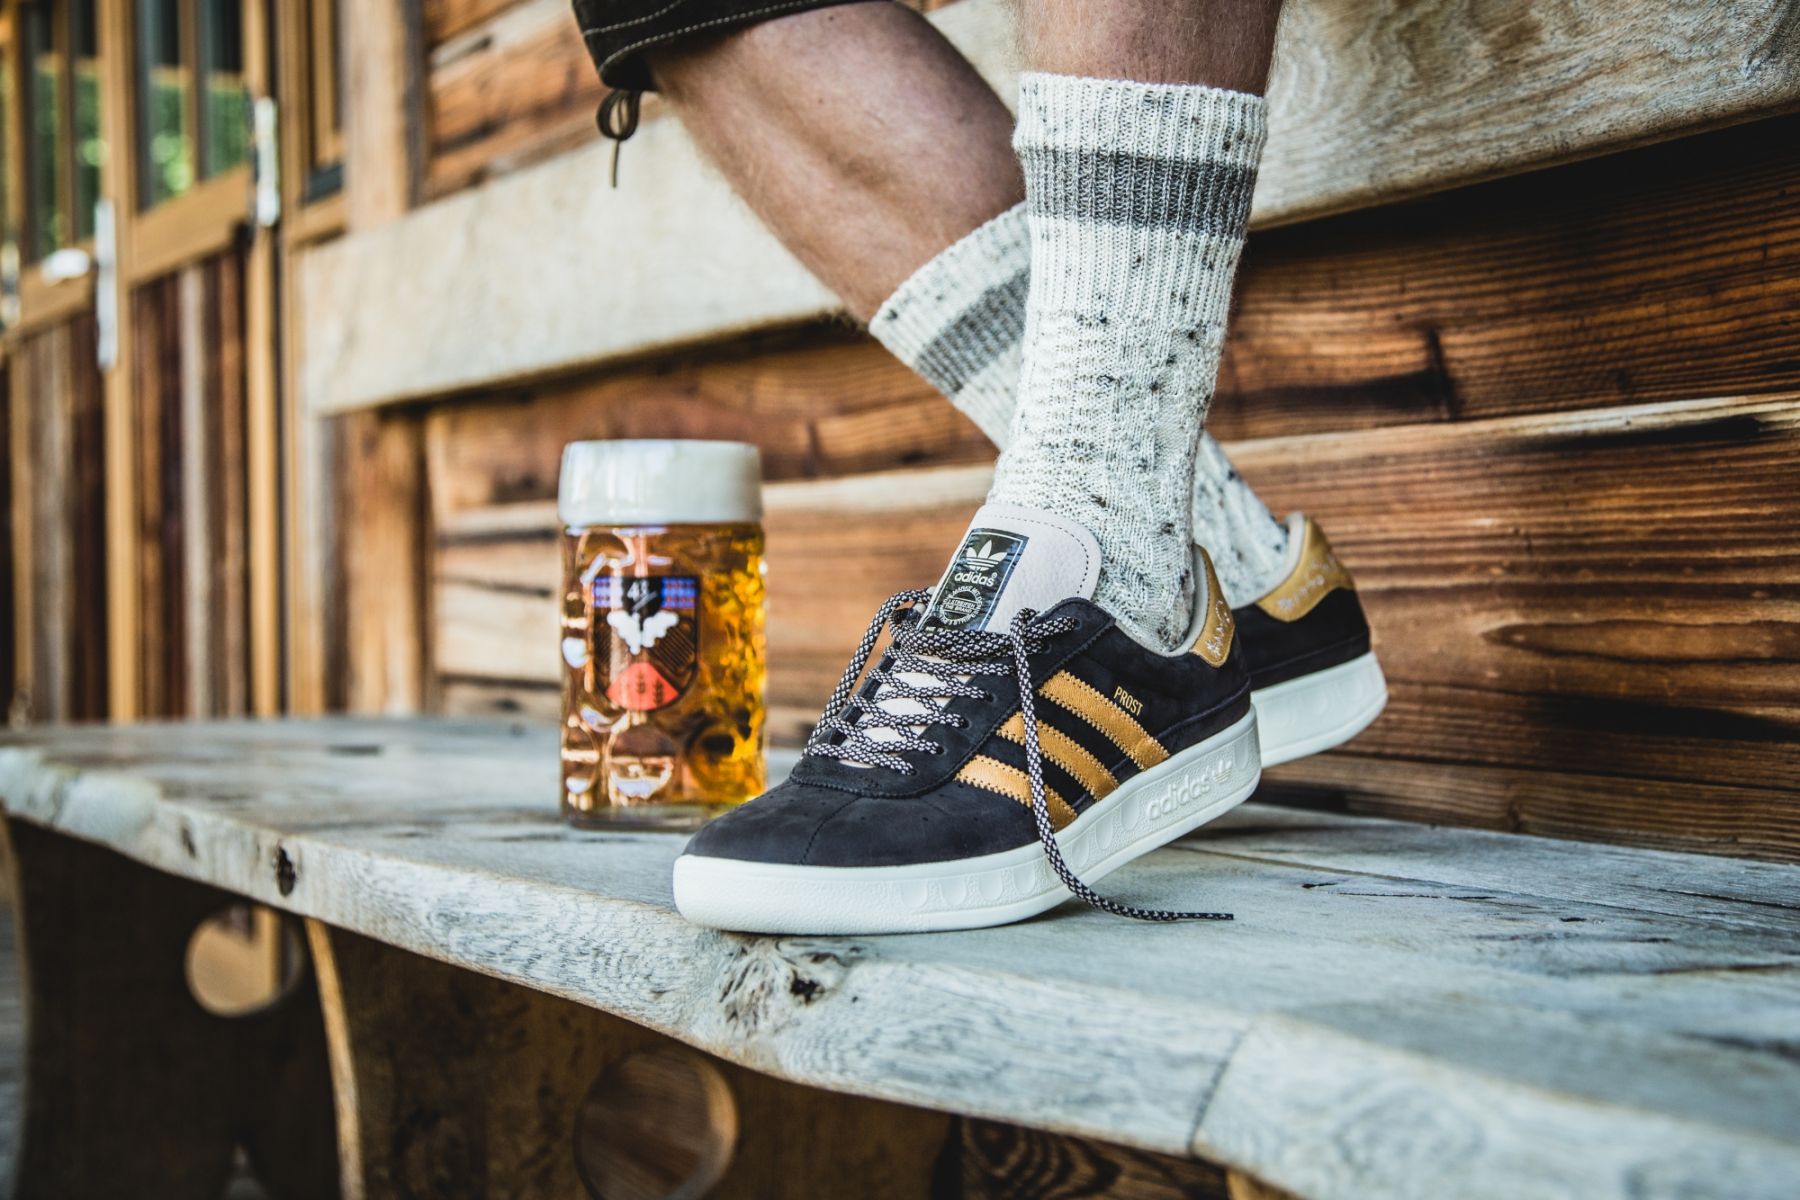 Adidas beer shoes